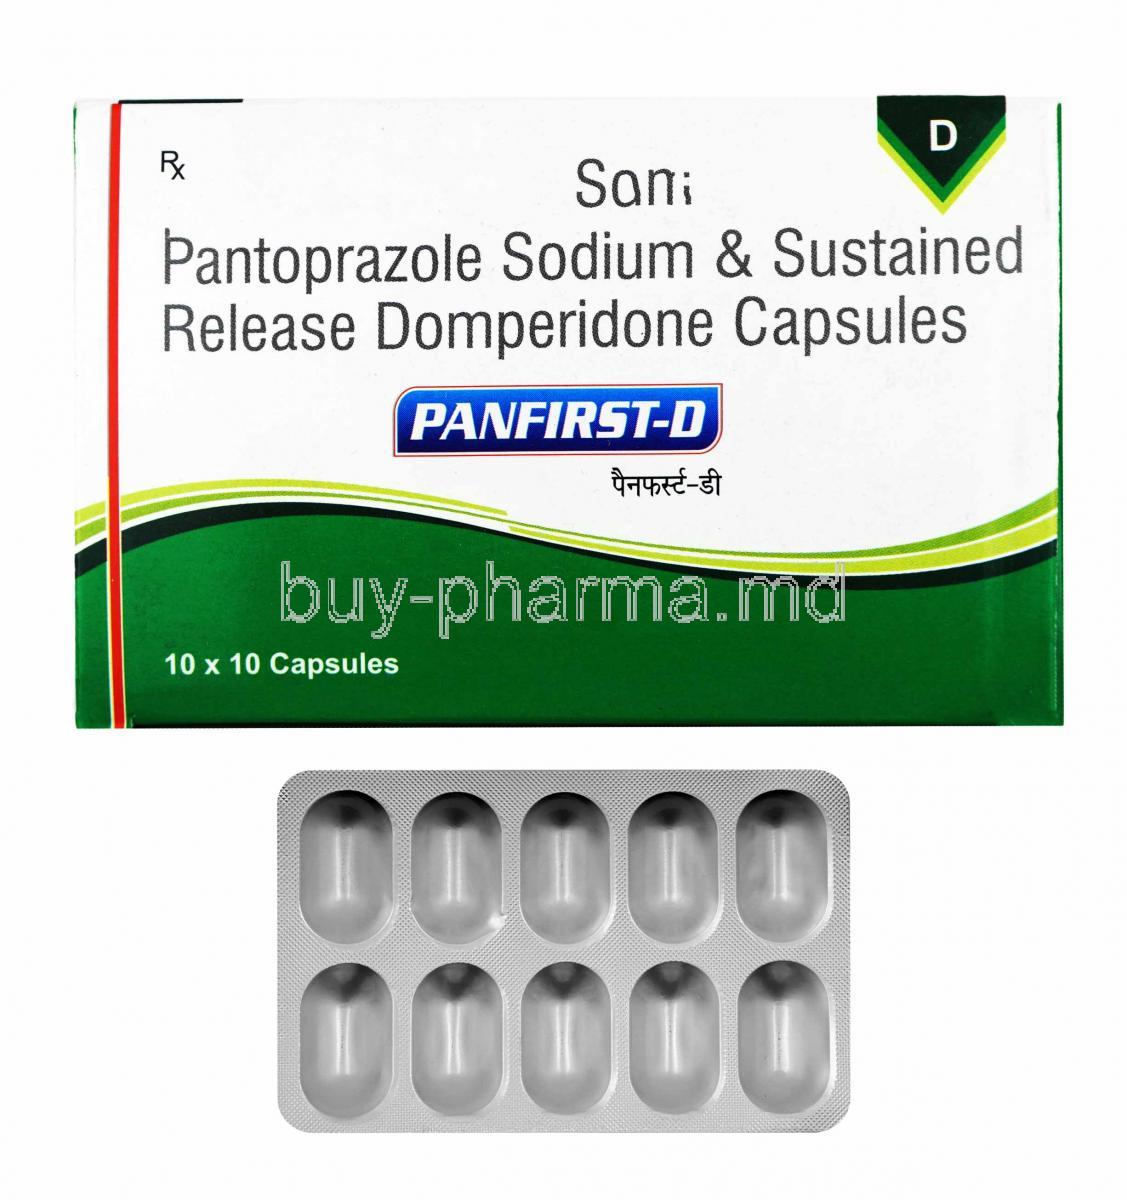 Panfirst-D, Domperidone and Pantoprazole box and tablets